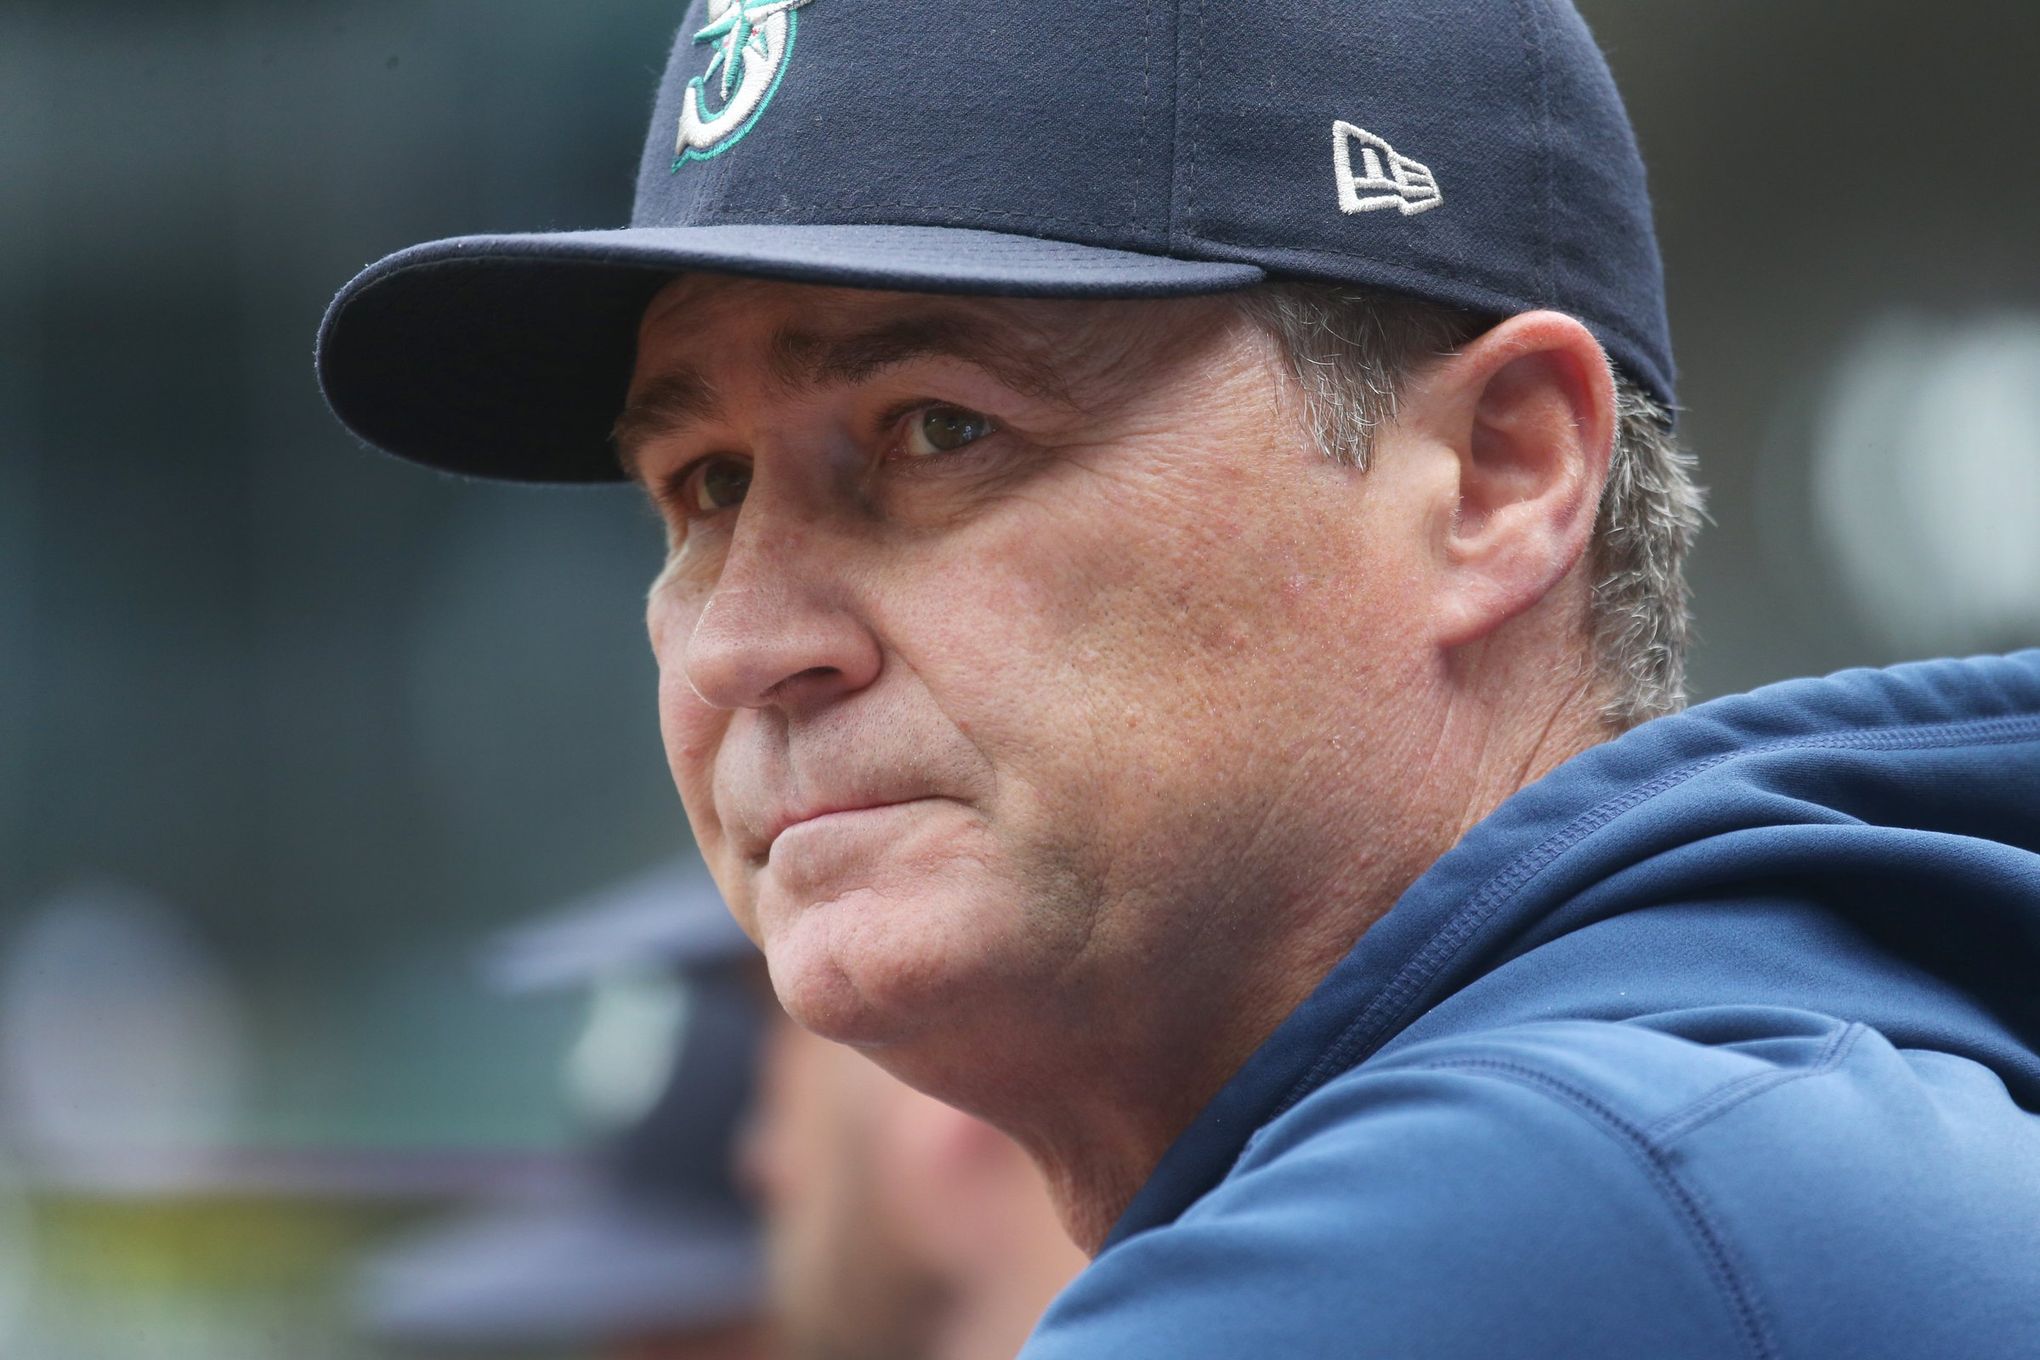 Mariners' Servais: How depth beyond MLB roster is shining for